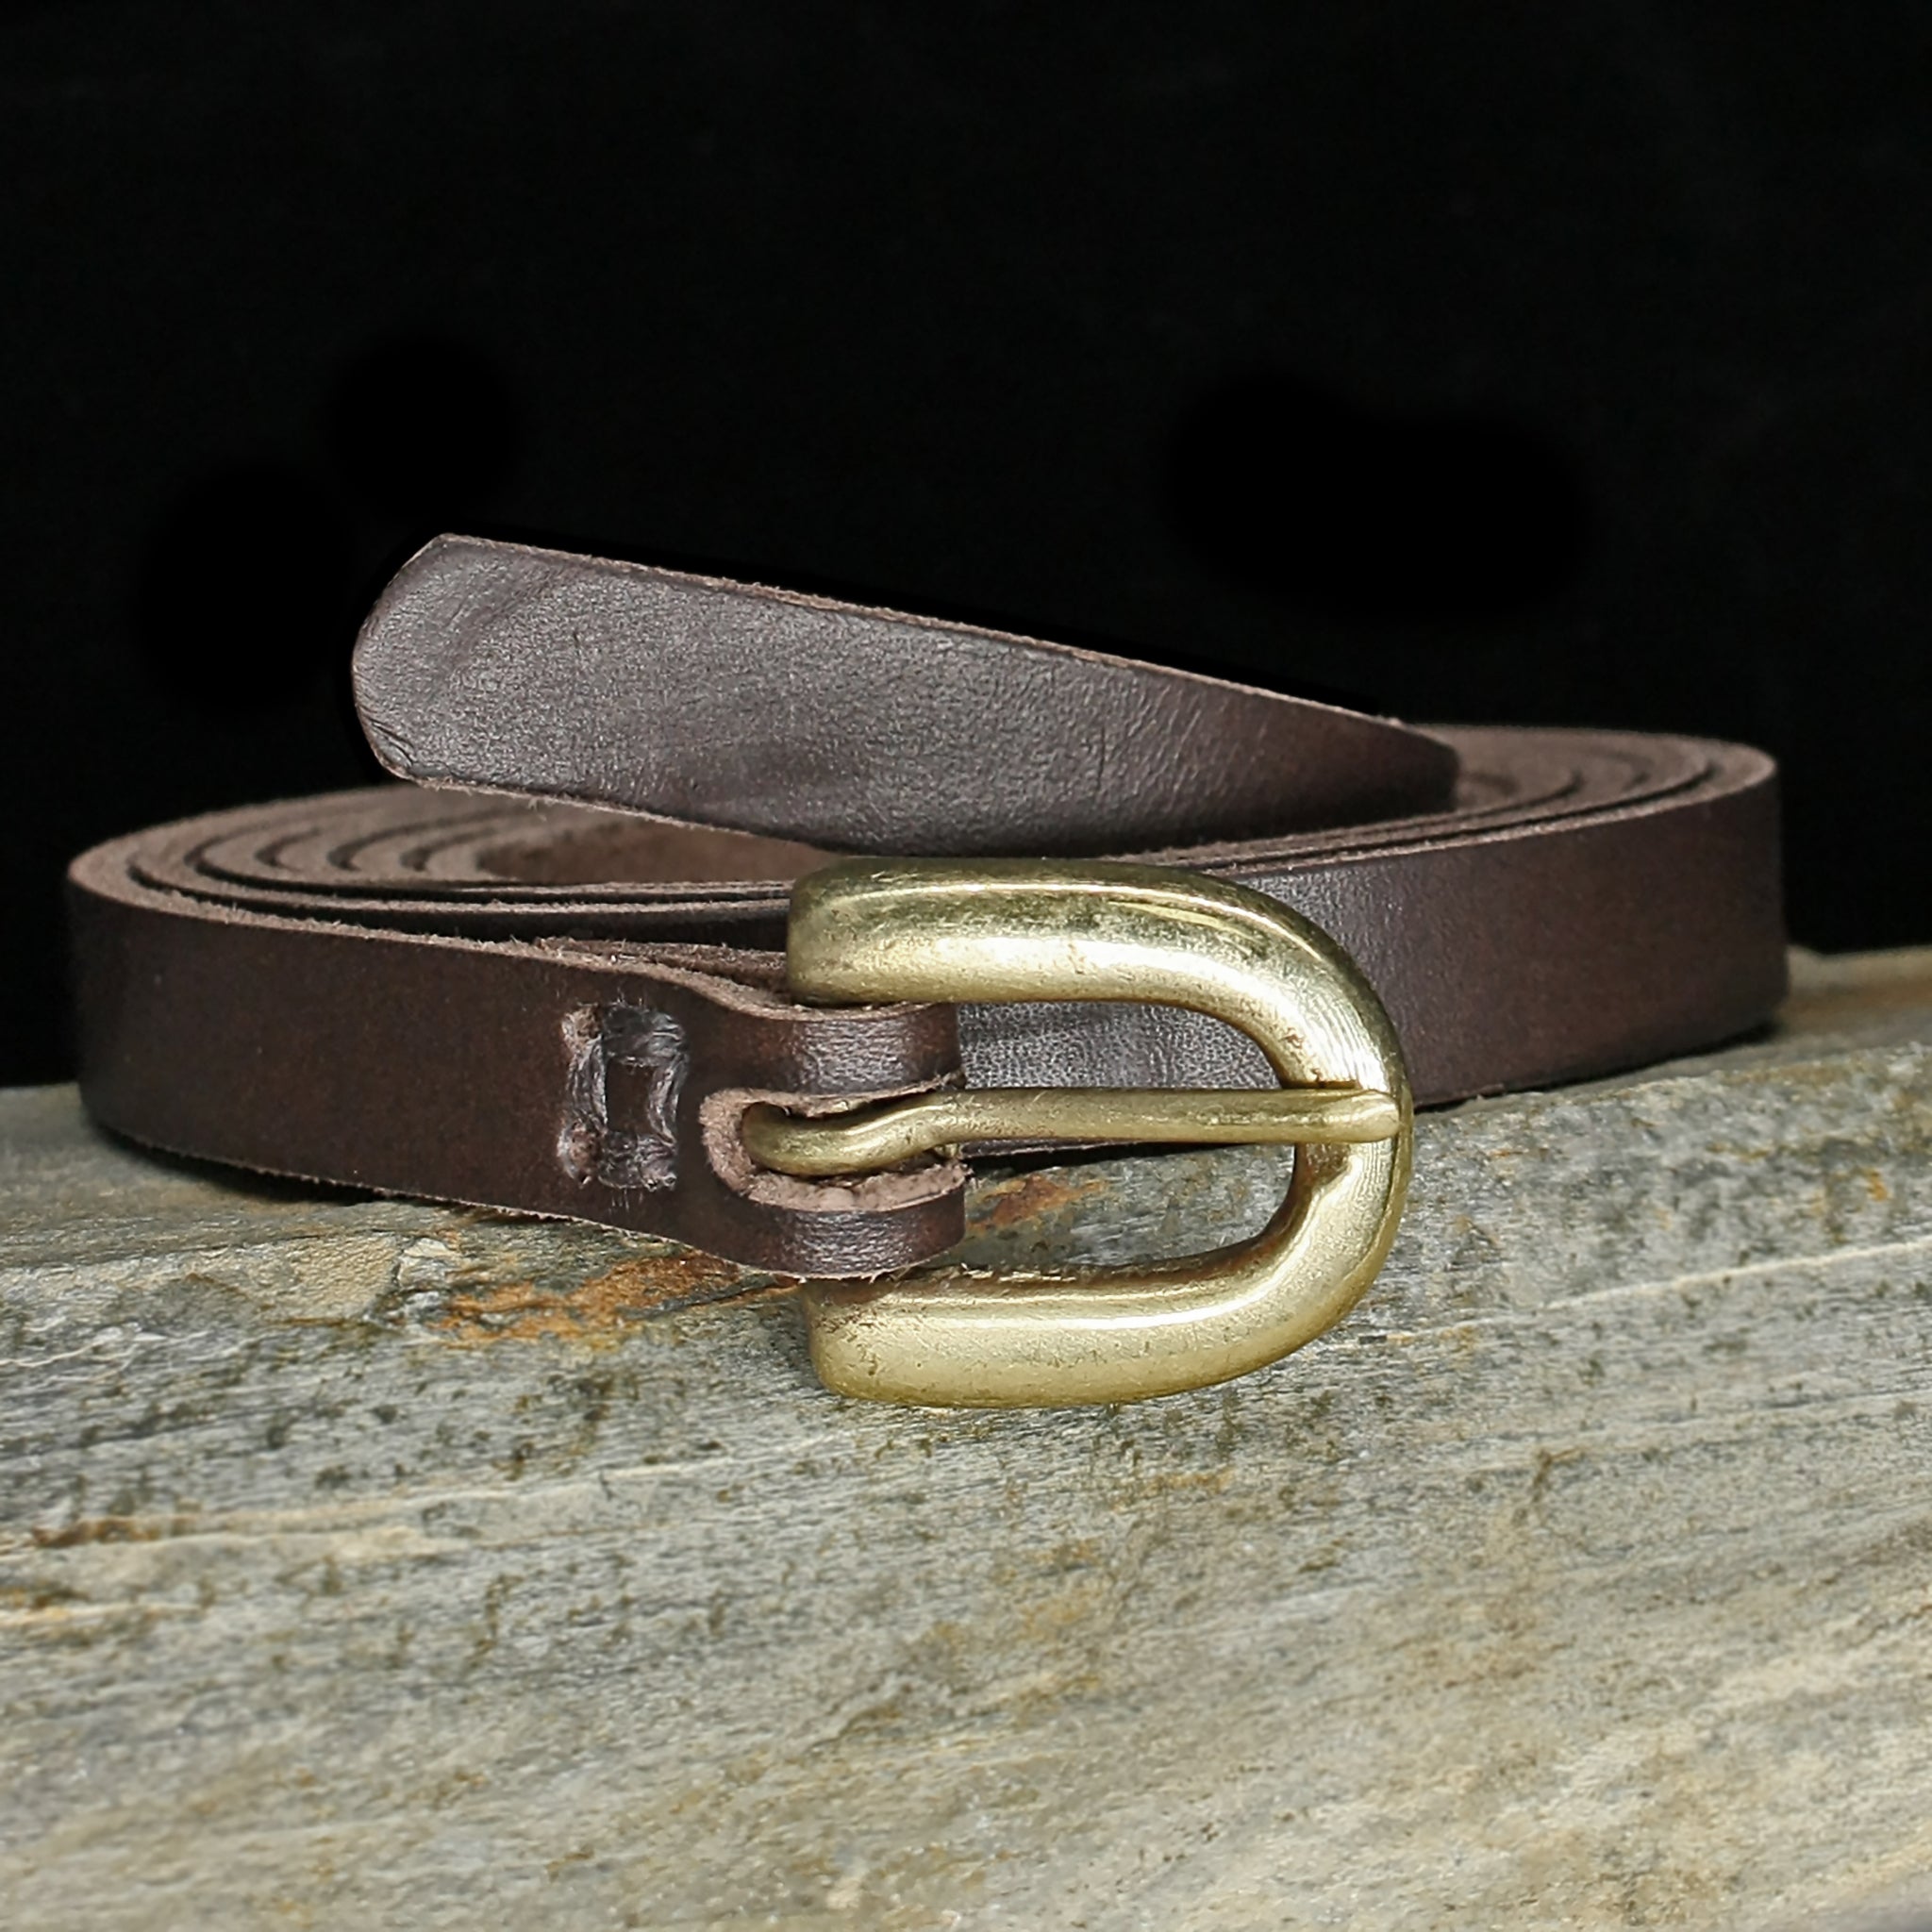 12mm (1/2 inch) leather Viking belt with brass buckle - Brown